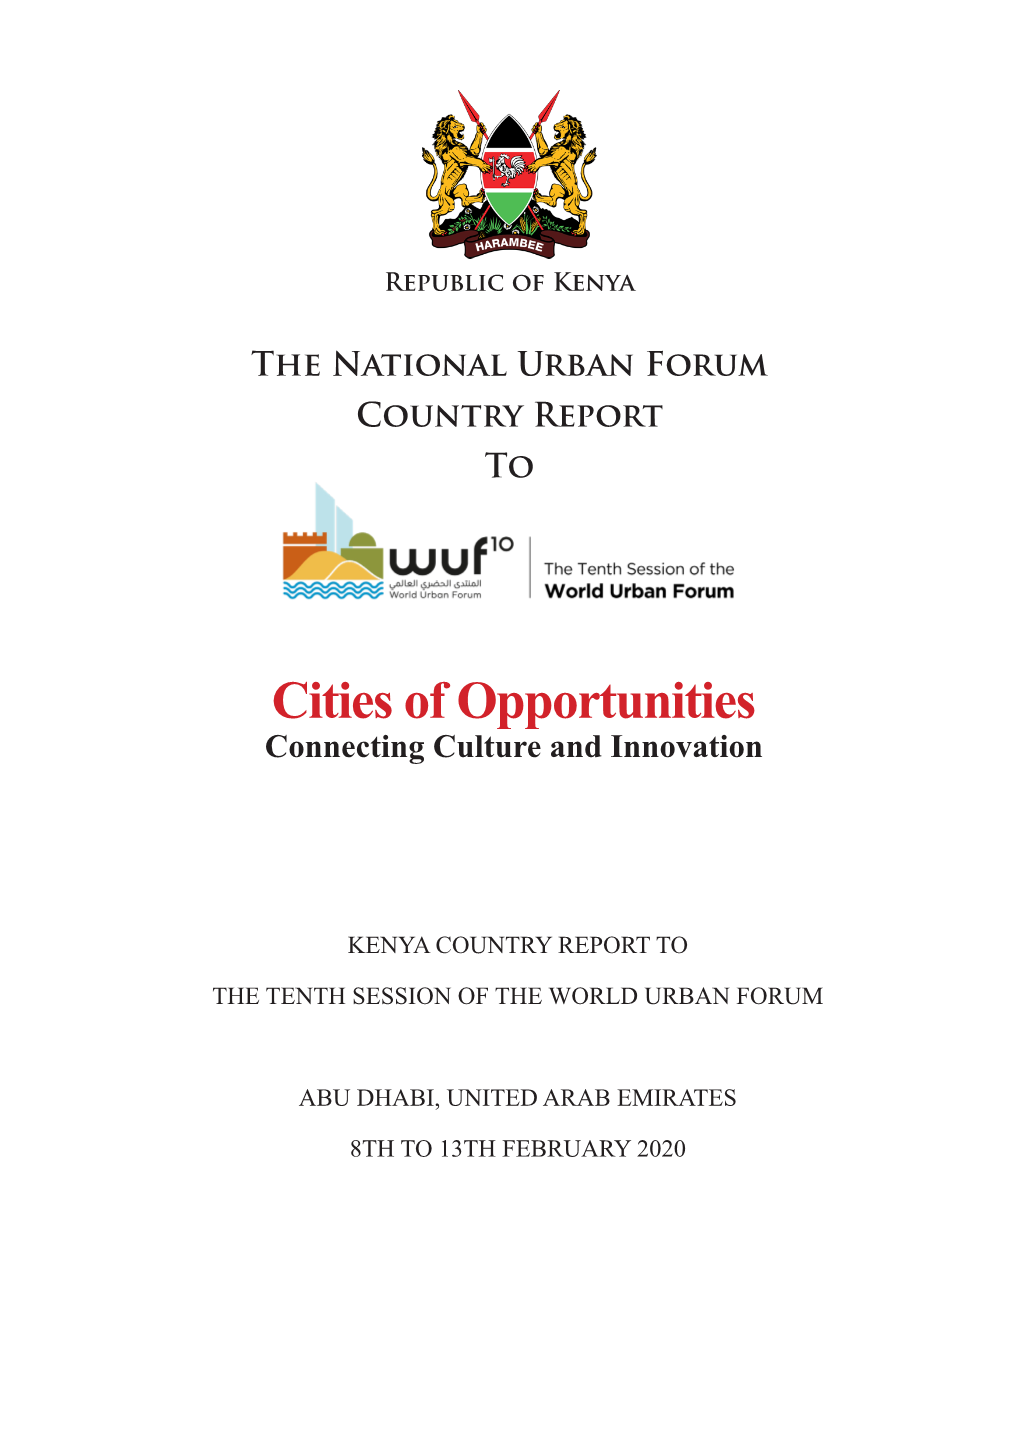 Kenya's Country Report to WUF 10 in Abu Dhabi